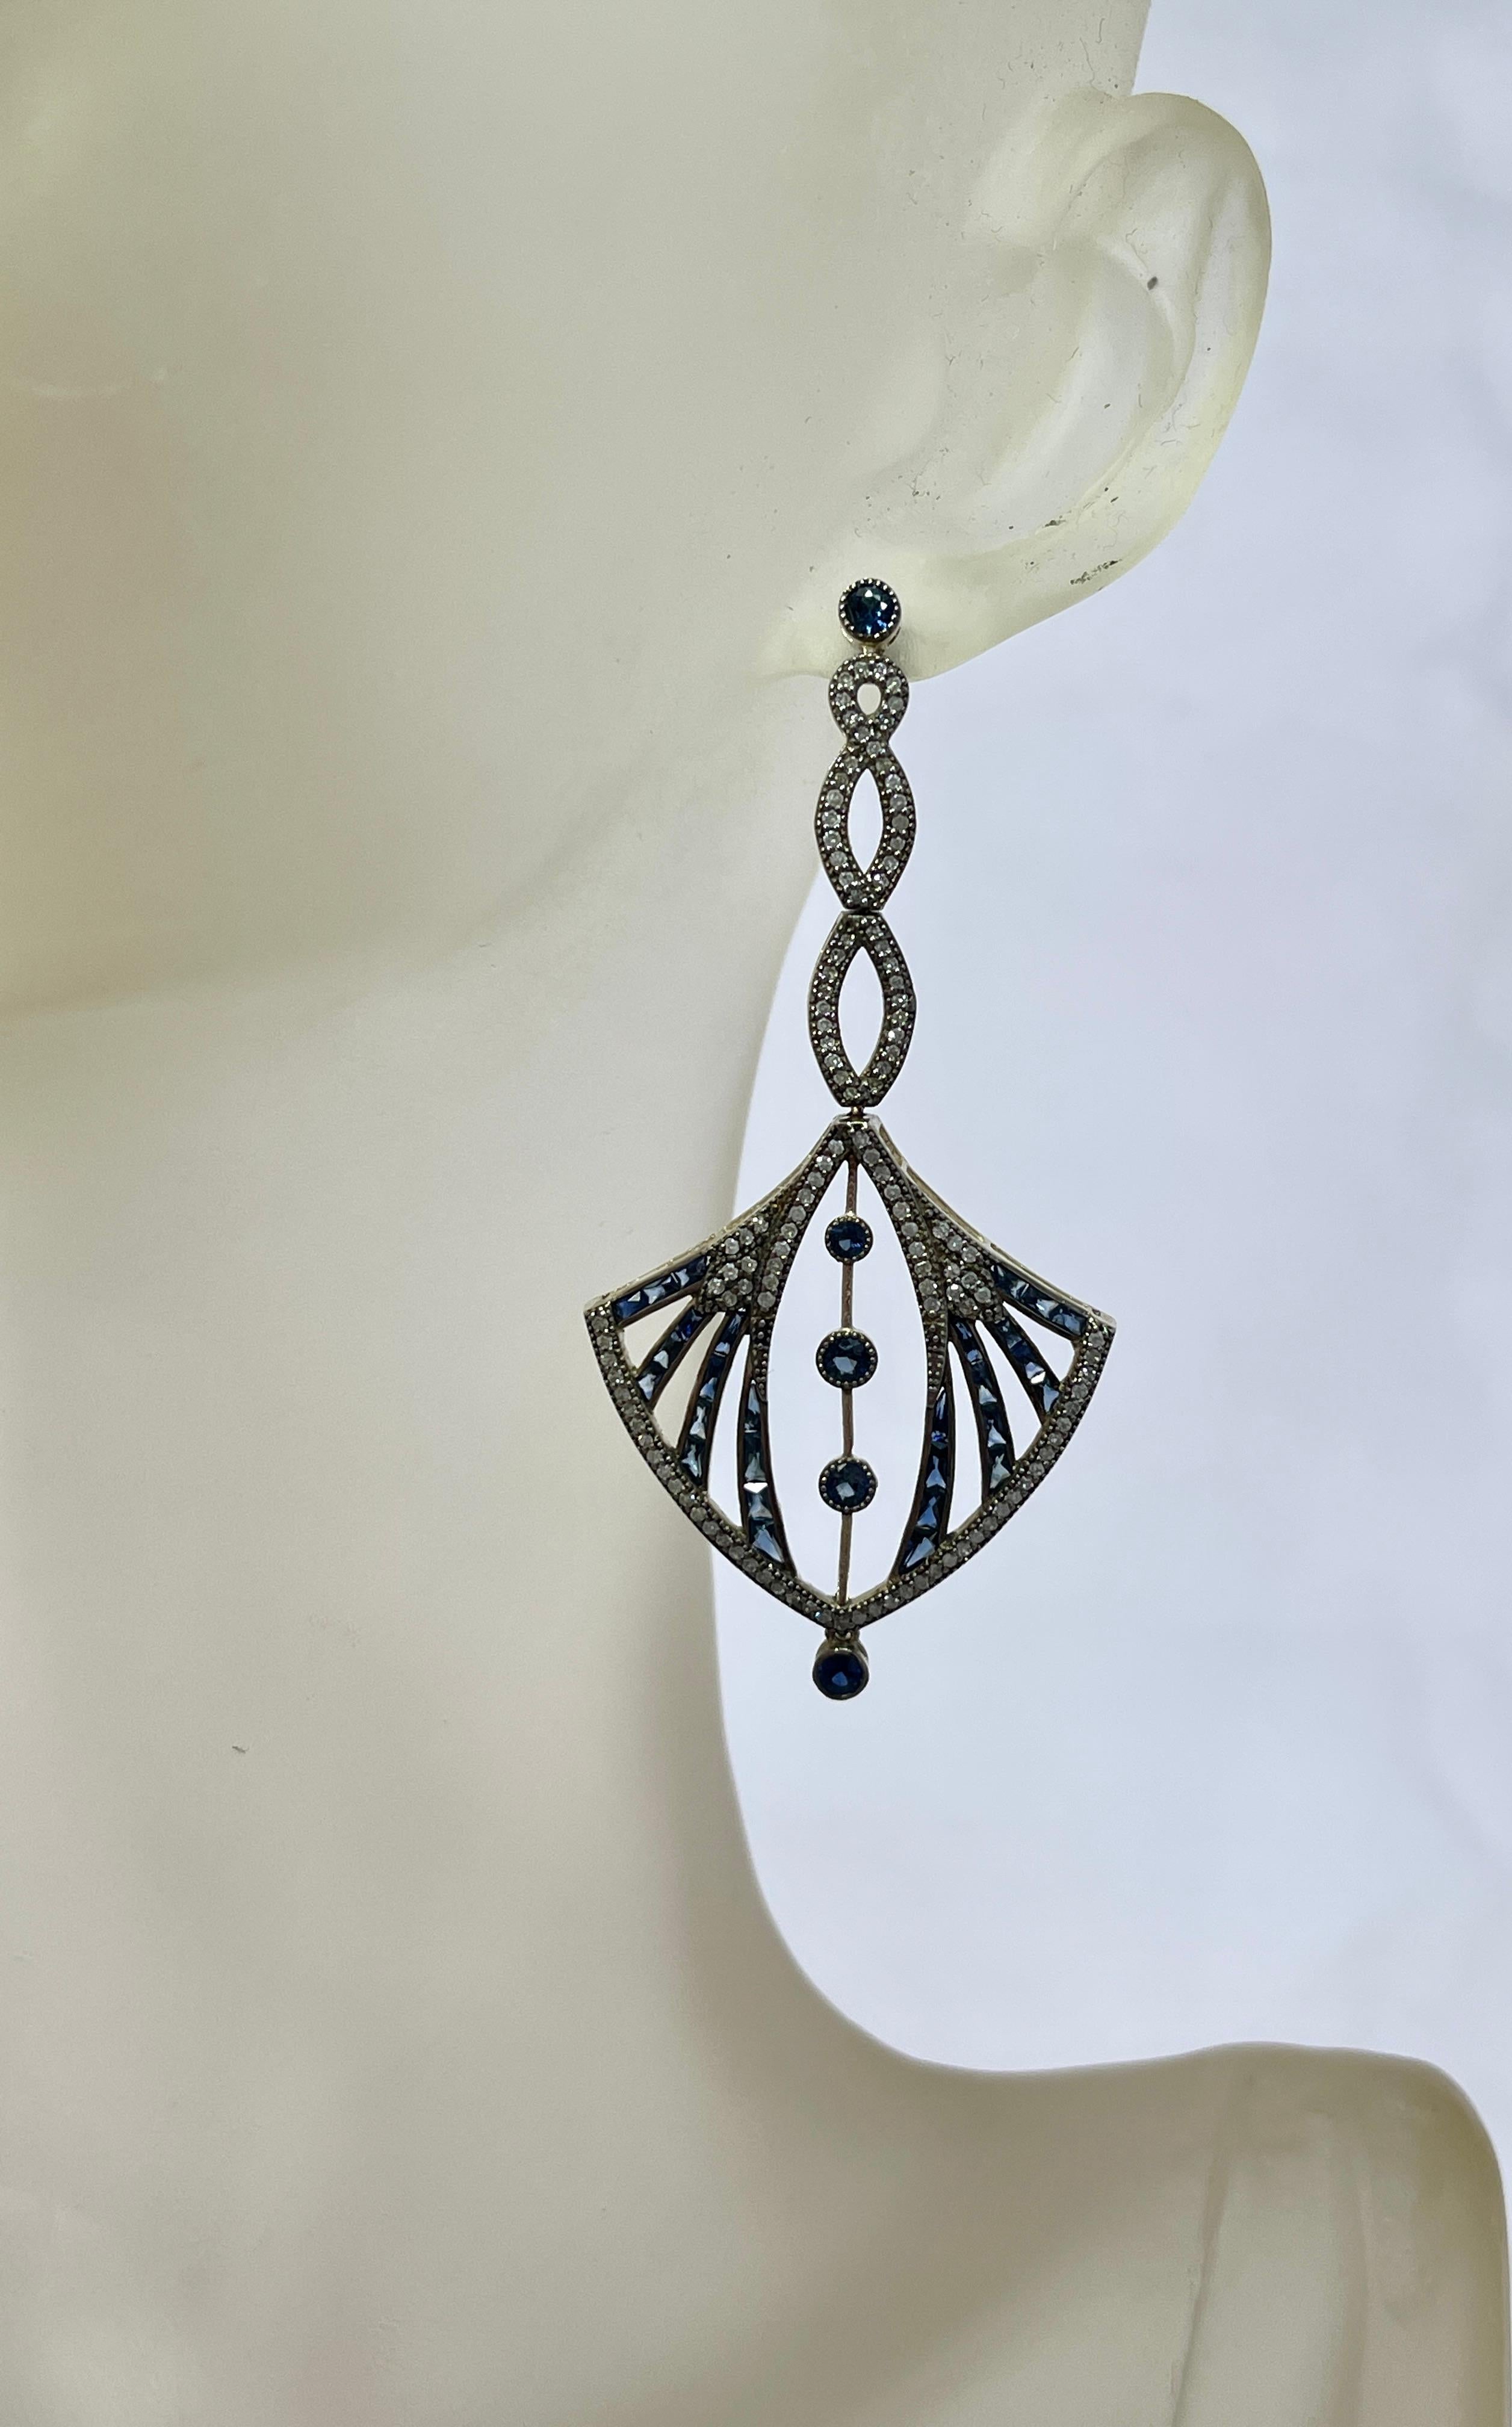 These earrings are fit for the hidden 'Flapper' within you!
They feature Art Deco Styling and are very special indeed.
The design incorporates the loved Art Deco Fan, which was a true feature of the time.
The earrings are set with Natural Sapphires